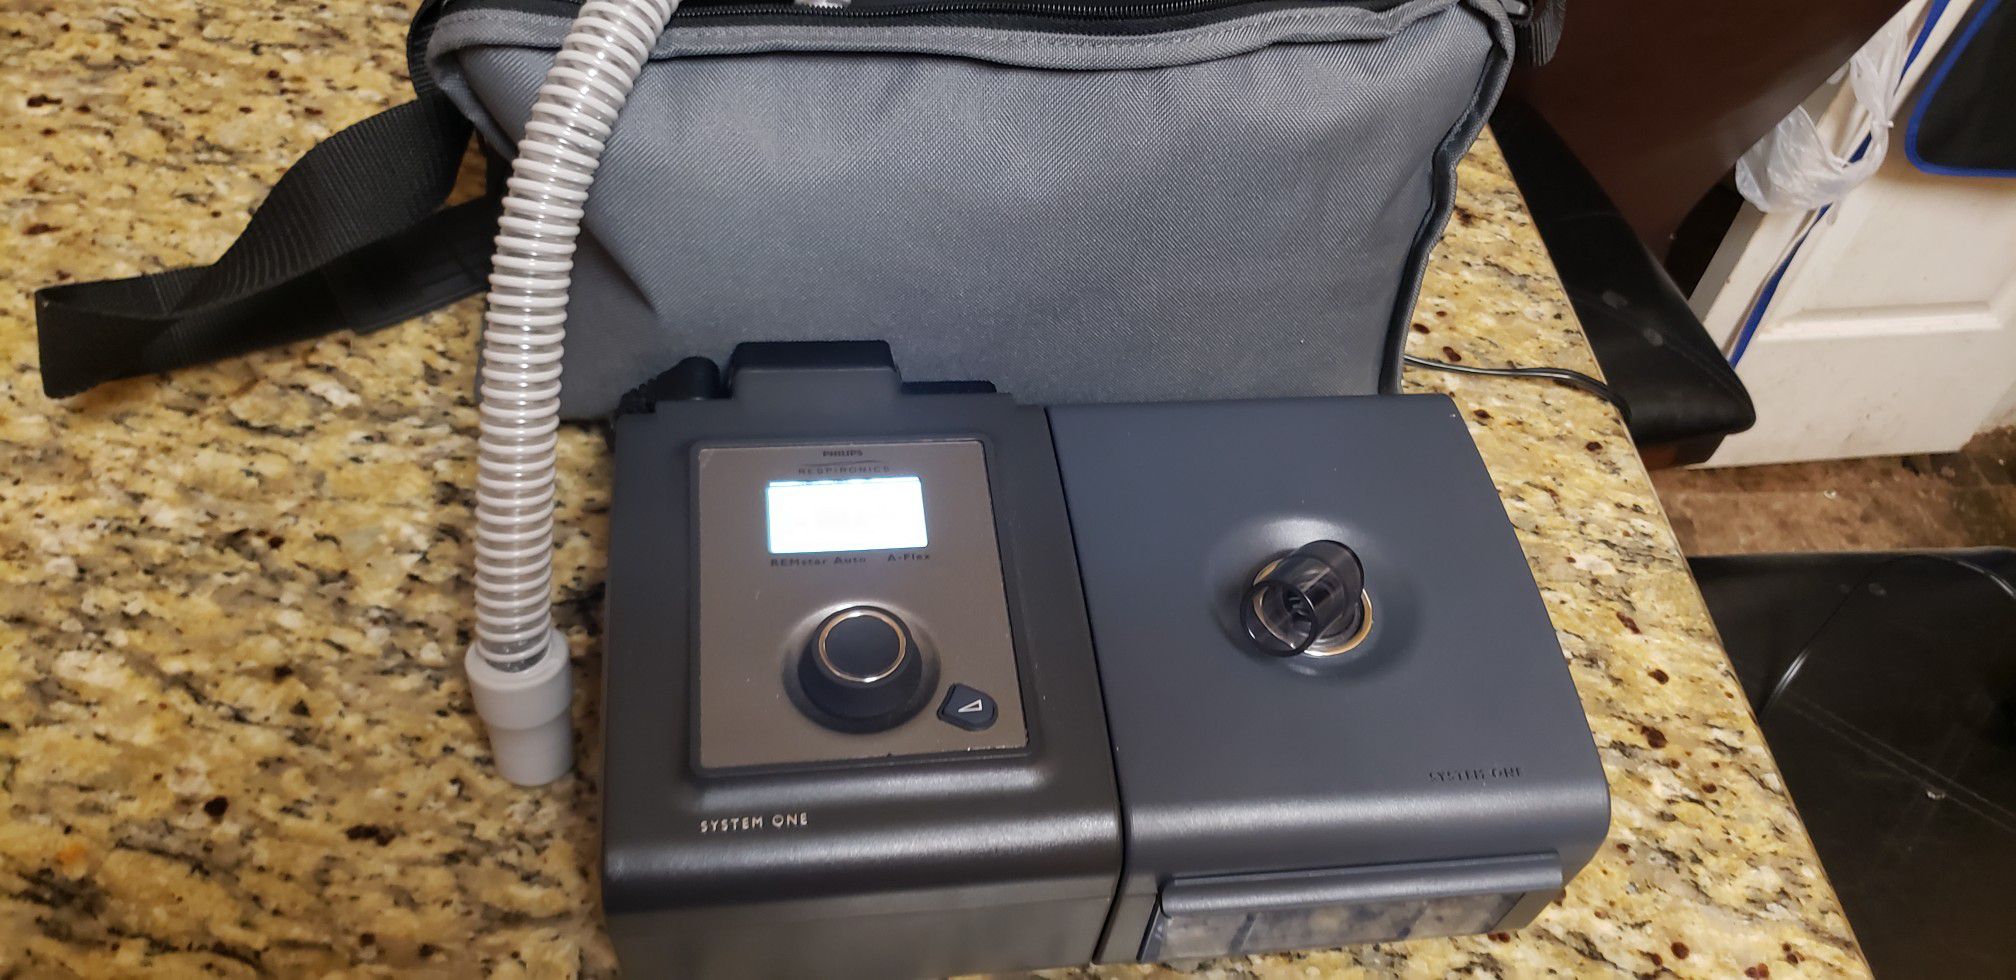 Respironic resmstar auto. Aflex. Cpap oxygen humidifier machine. Low hrs